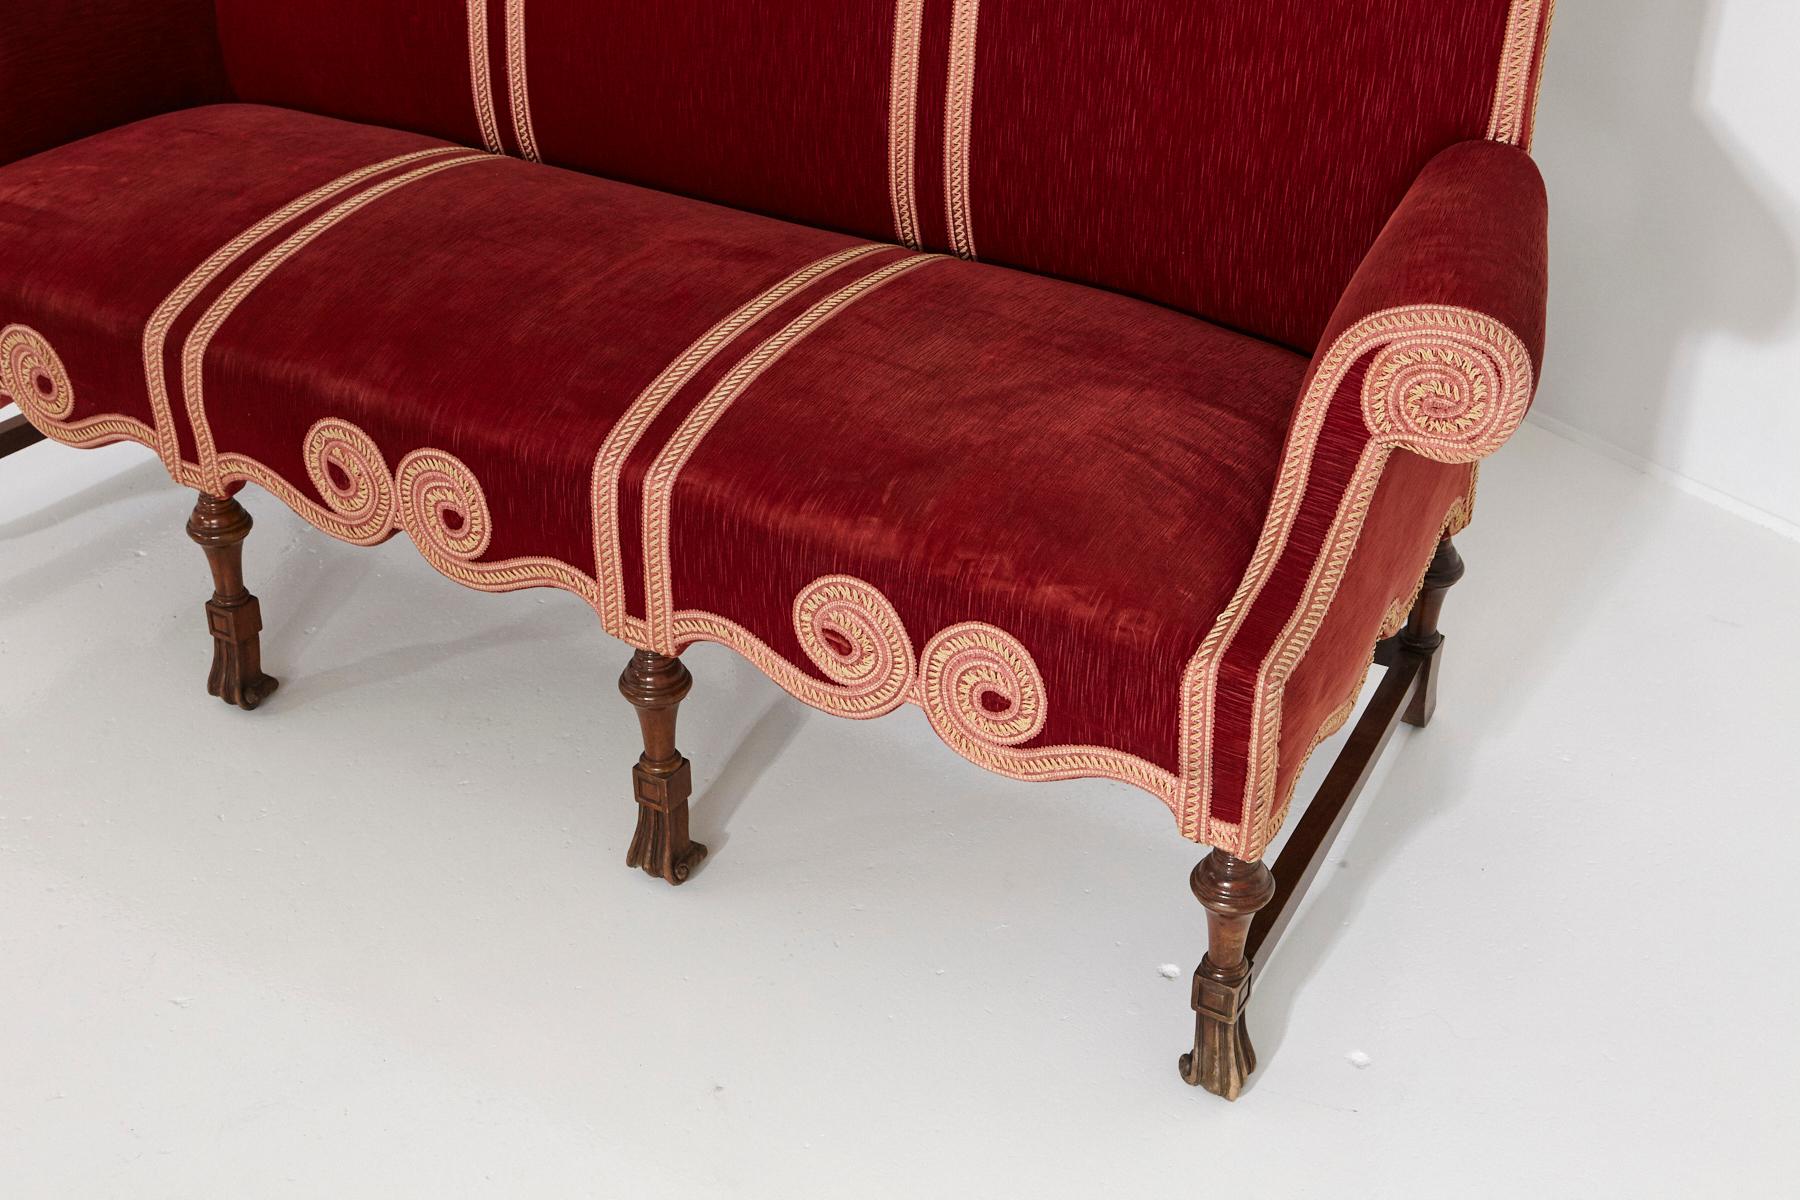 Victorian Long Seat Sofa in Red Striae Velvet with Scrolled Arms and Camelback 1